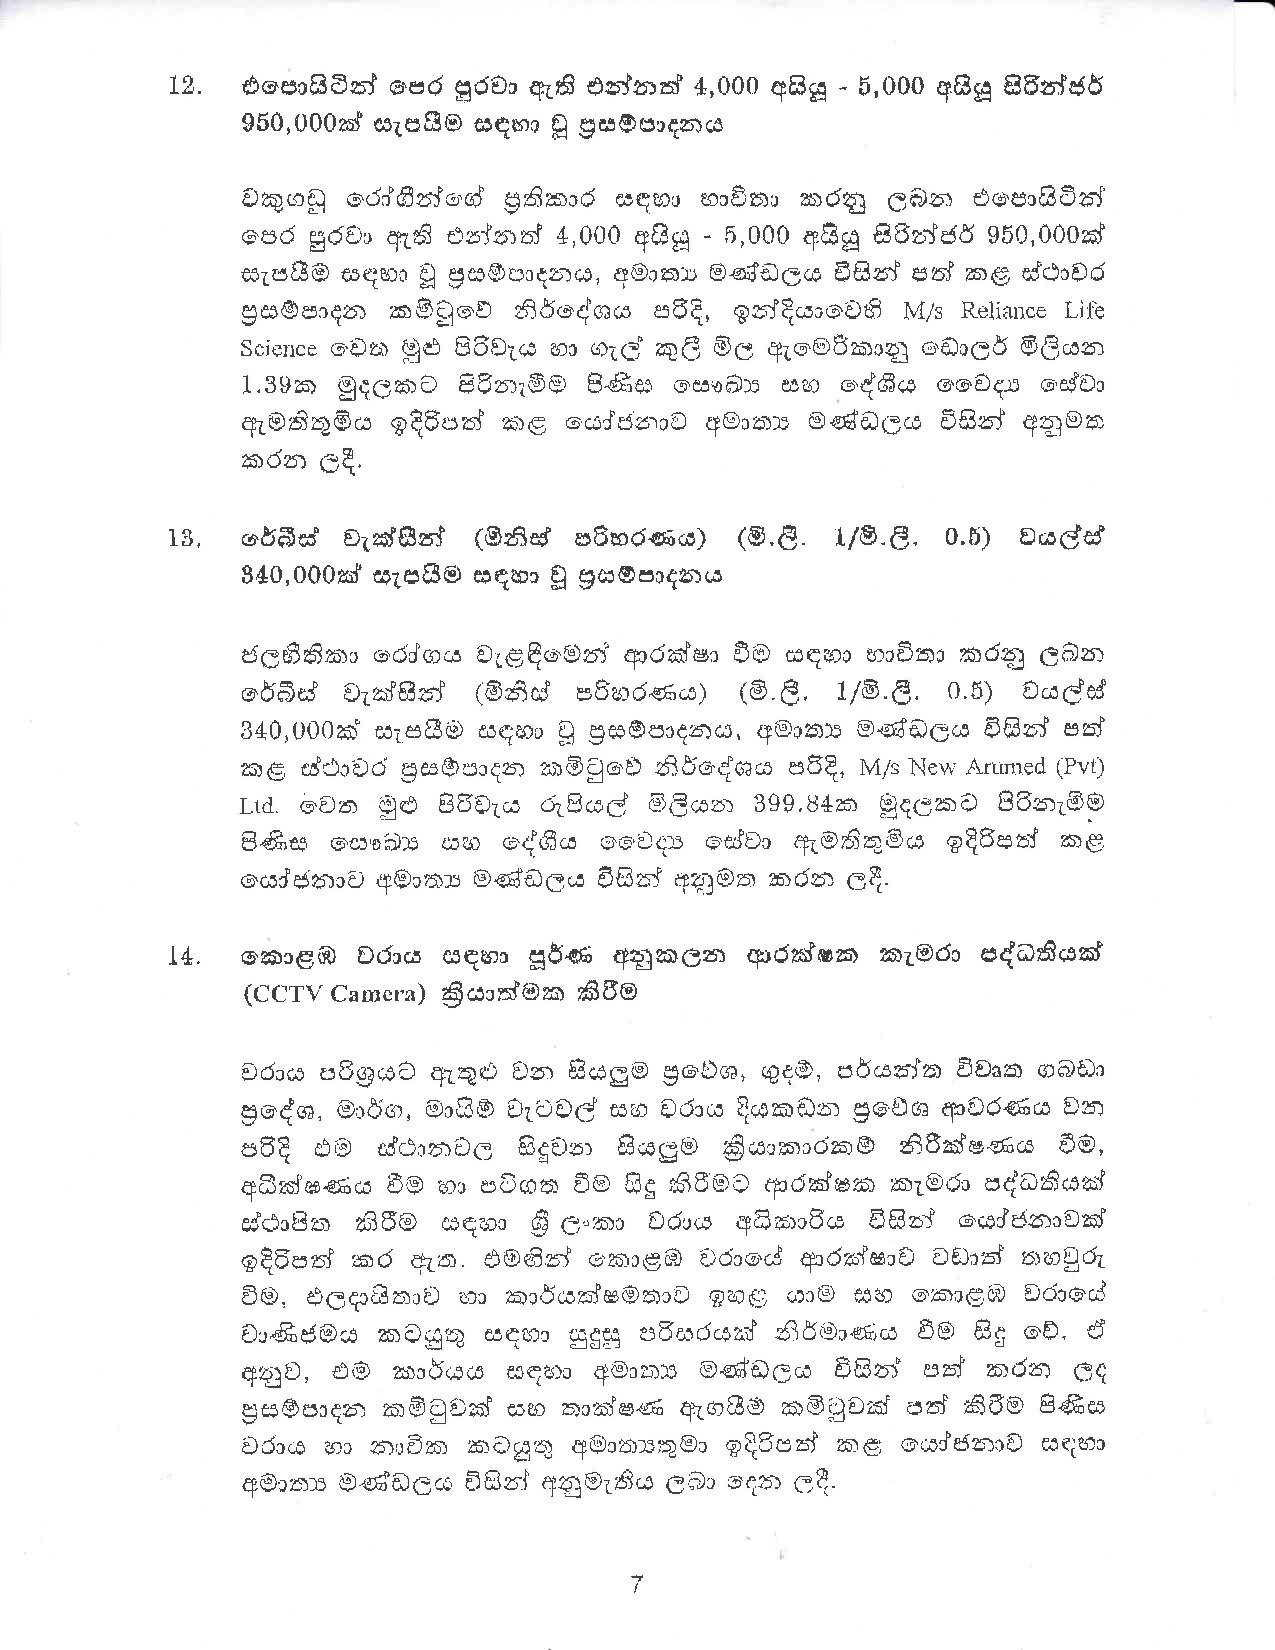 Cabinet Decision on 05.02.2020 page 007